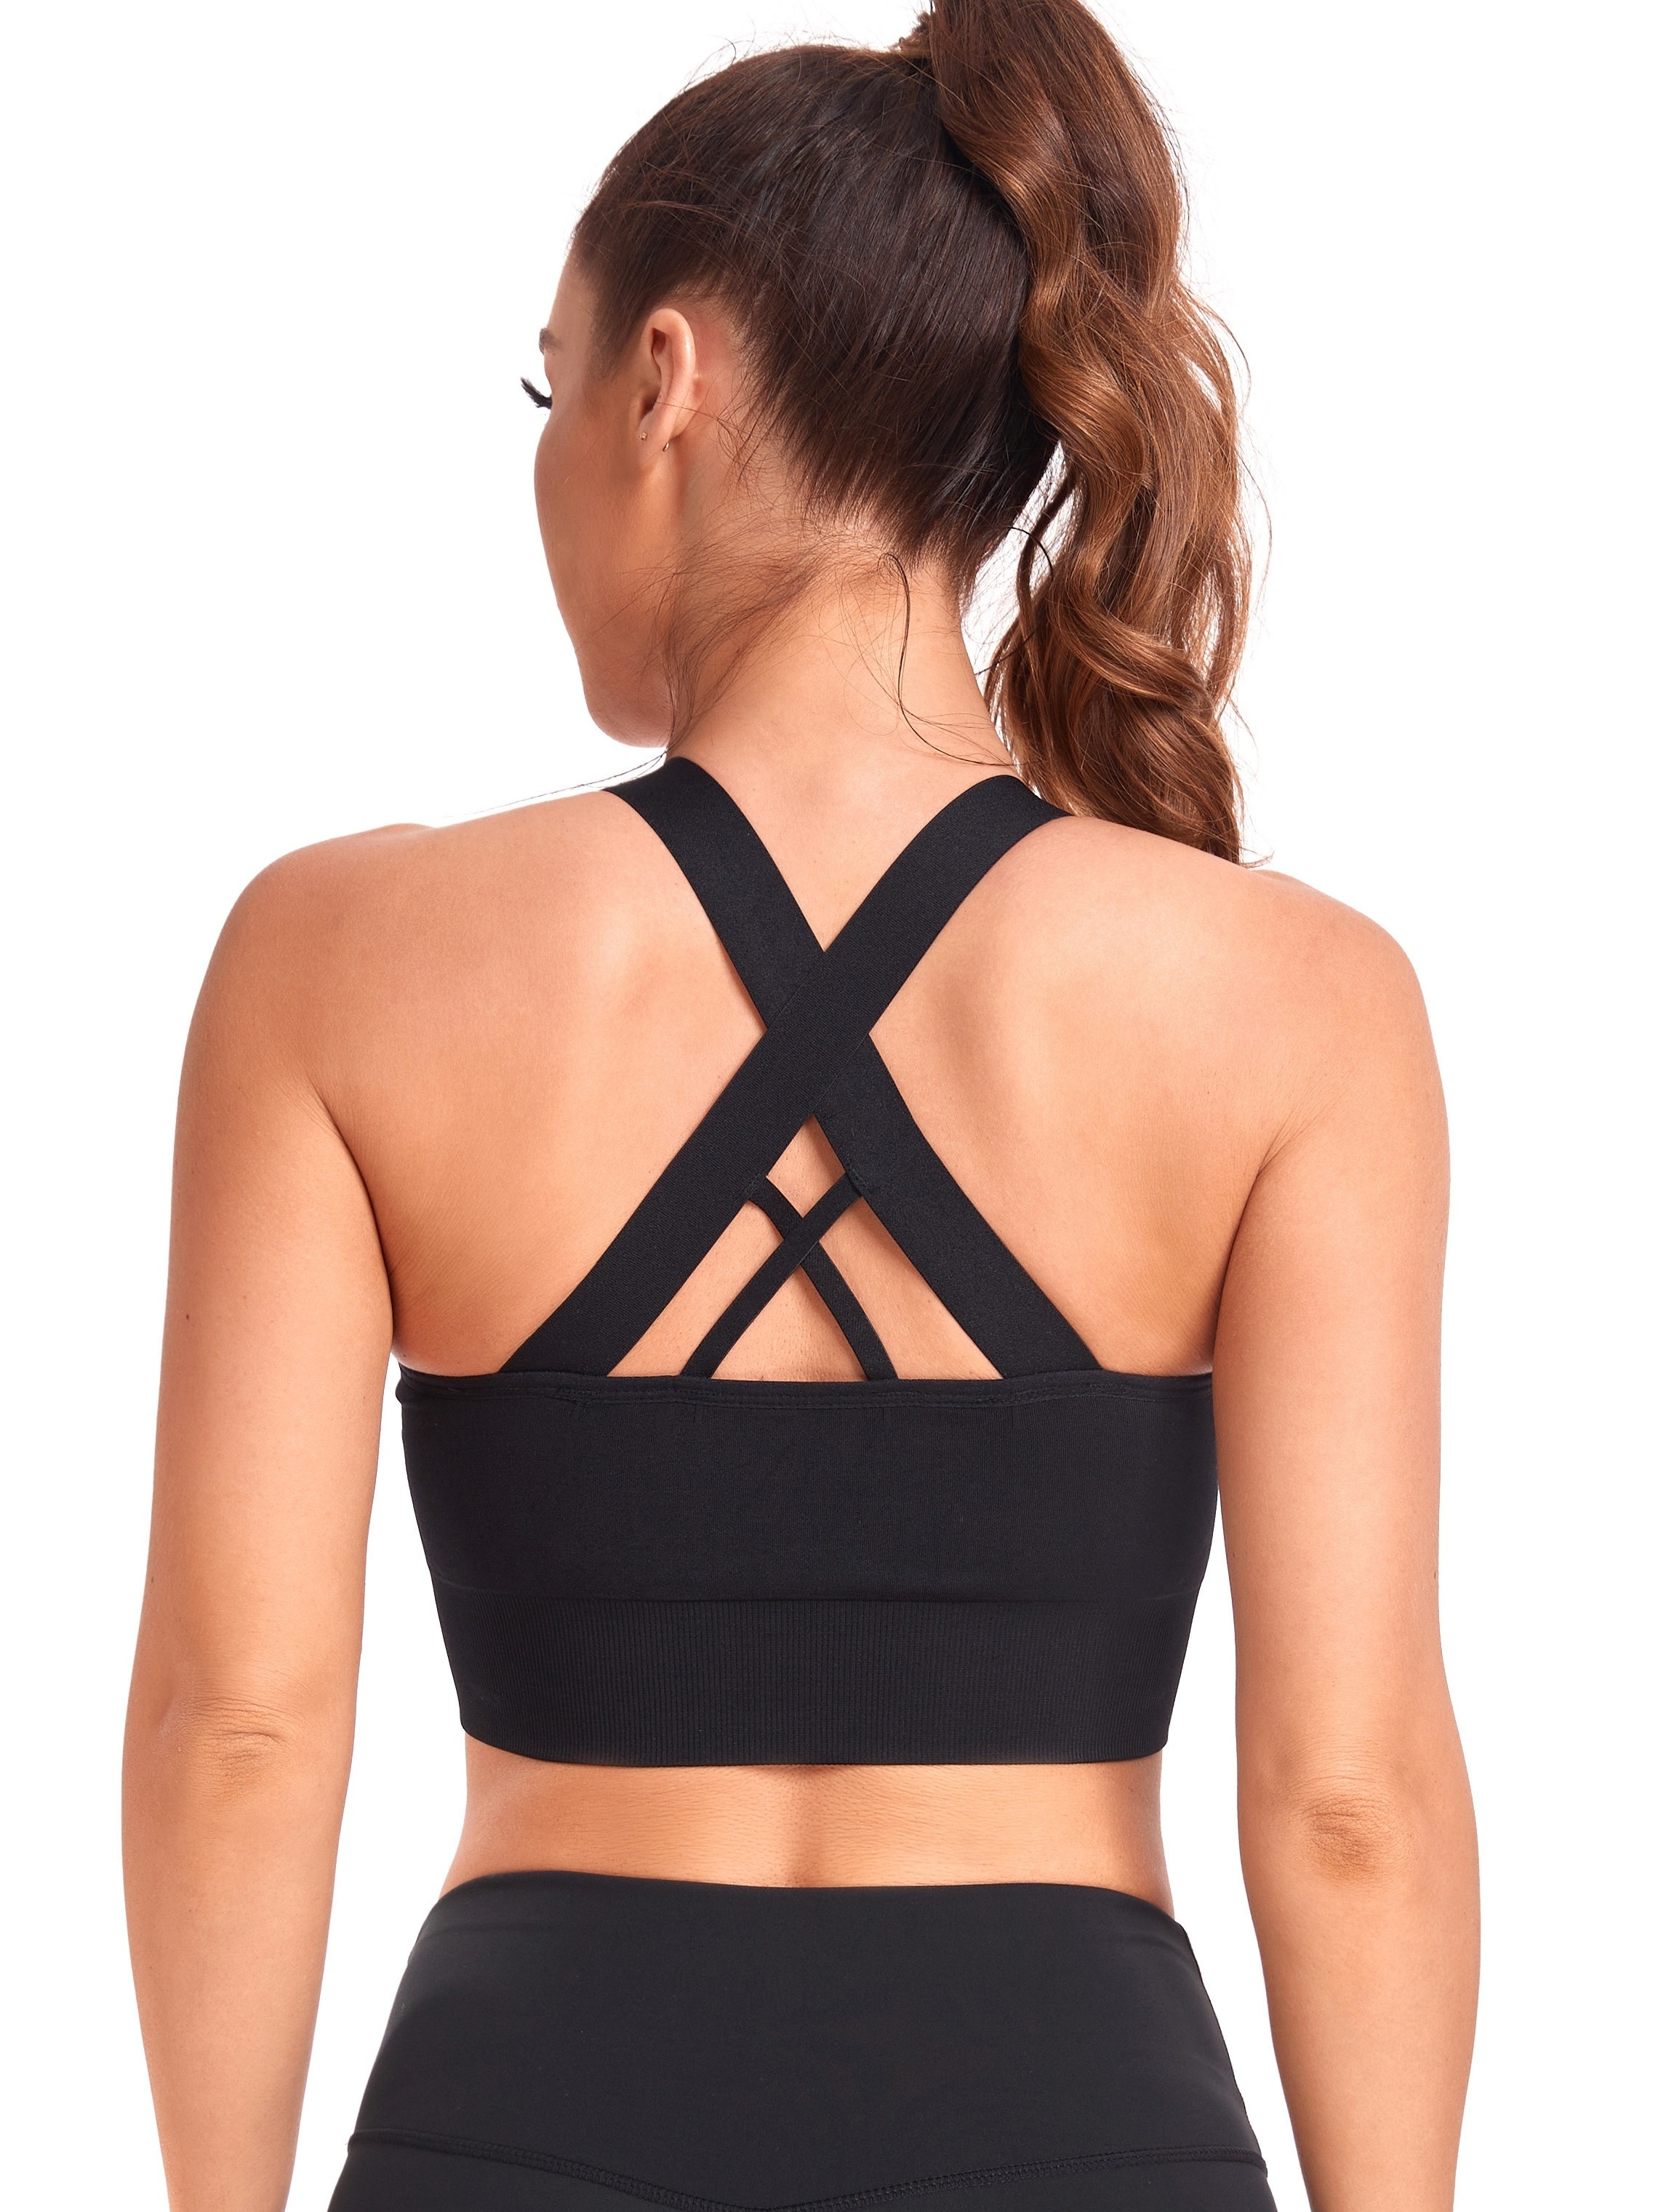 Women Sports Bras Strappy Criss Cross Back Sports Bra Low Impact Bras  Backless Padded Fitness Workout Crop Tank Top Bra,Black at  Women's  Clothing store